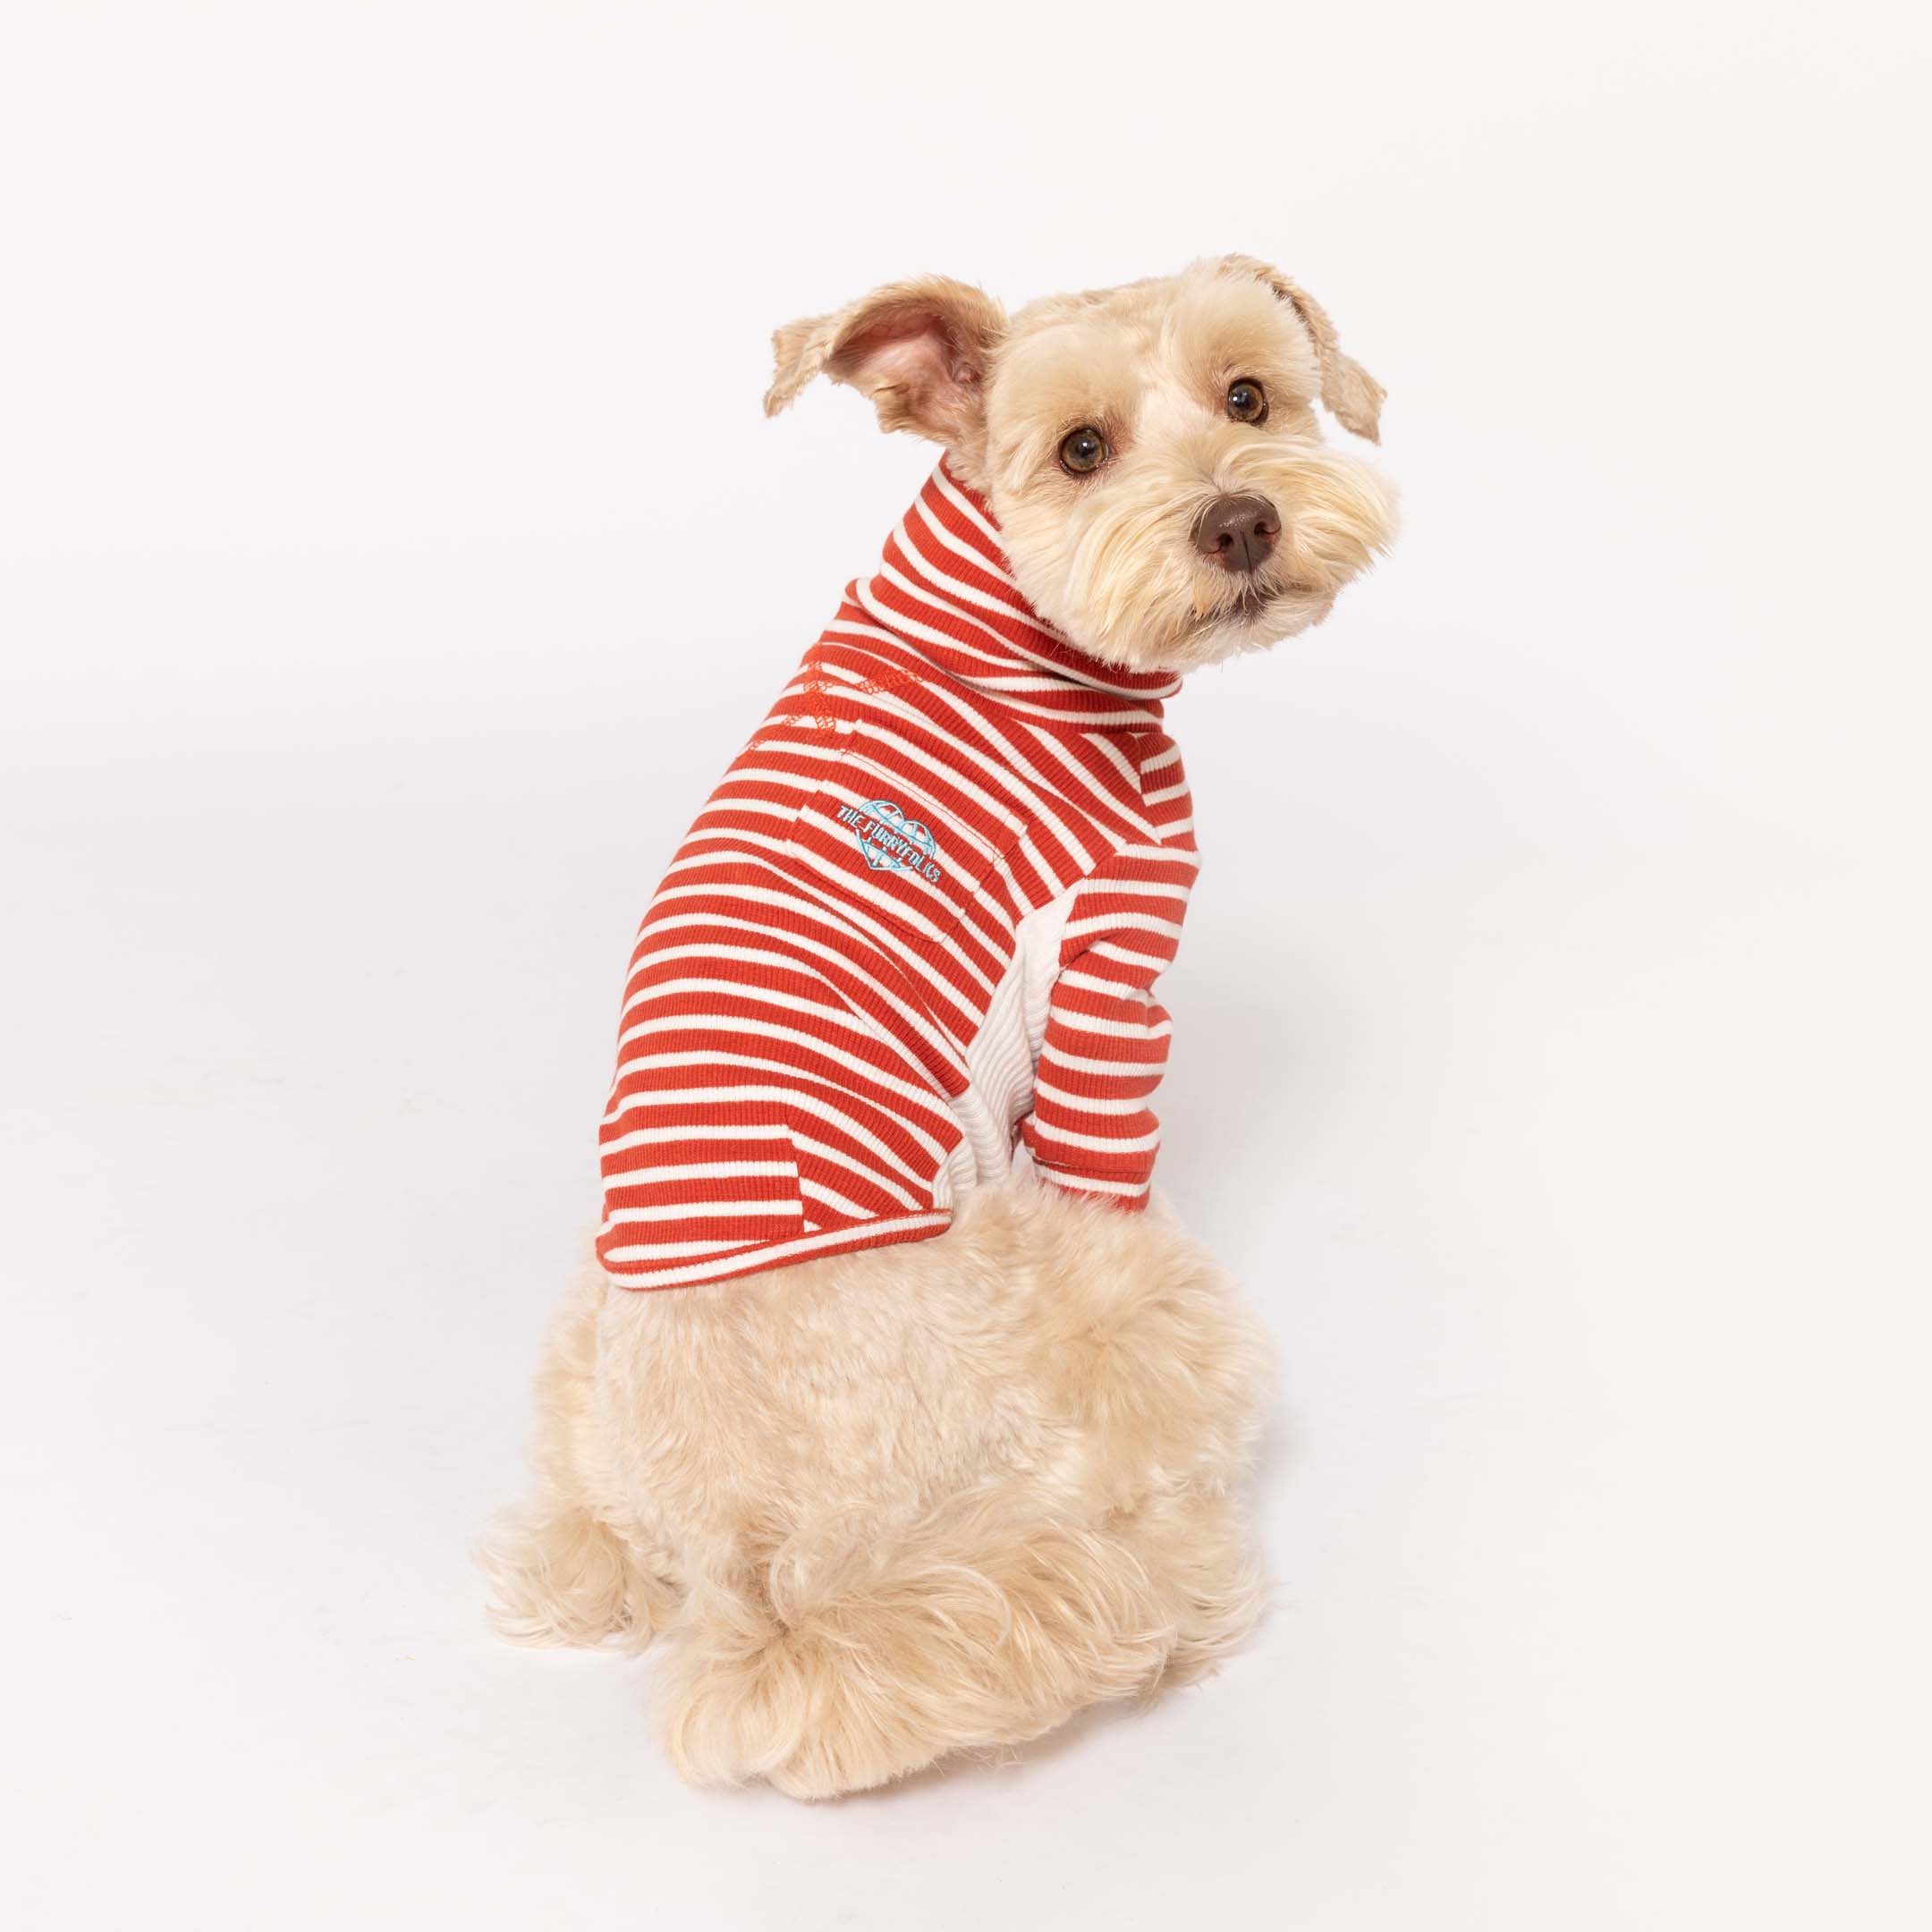 Happy Schnauzer in a Rust & Ivory  striped shirt, showcasing the perfect blend of style and comfort in pet fashion.